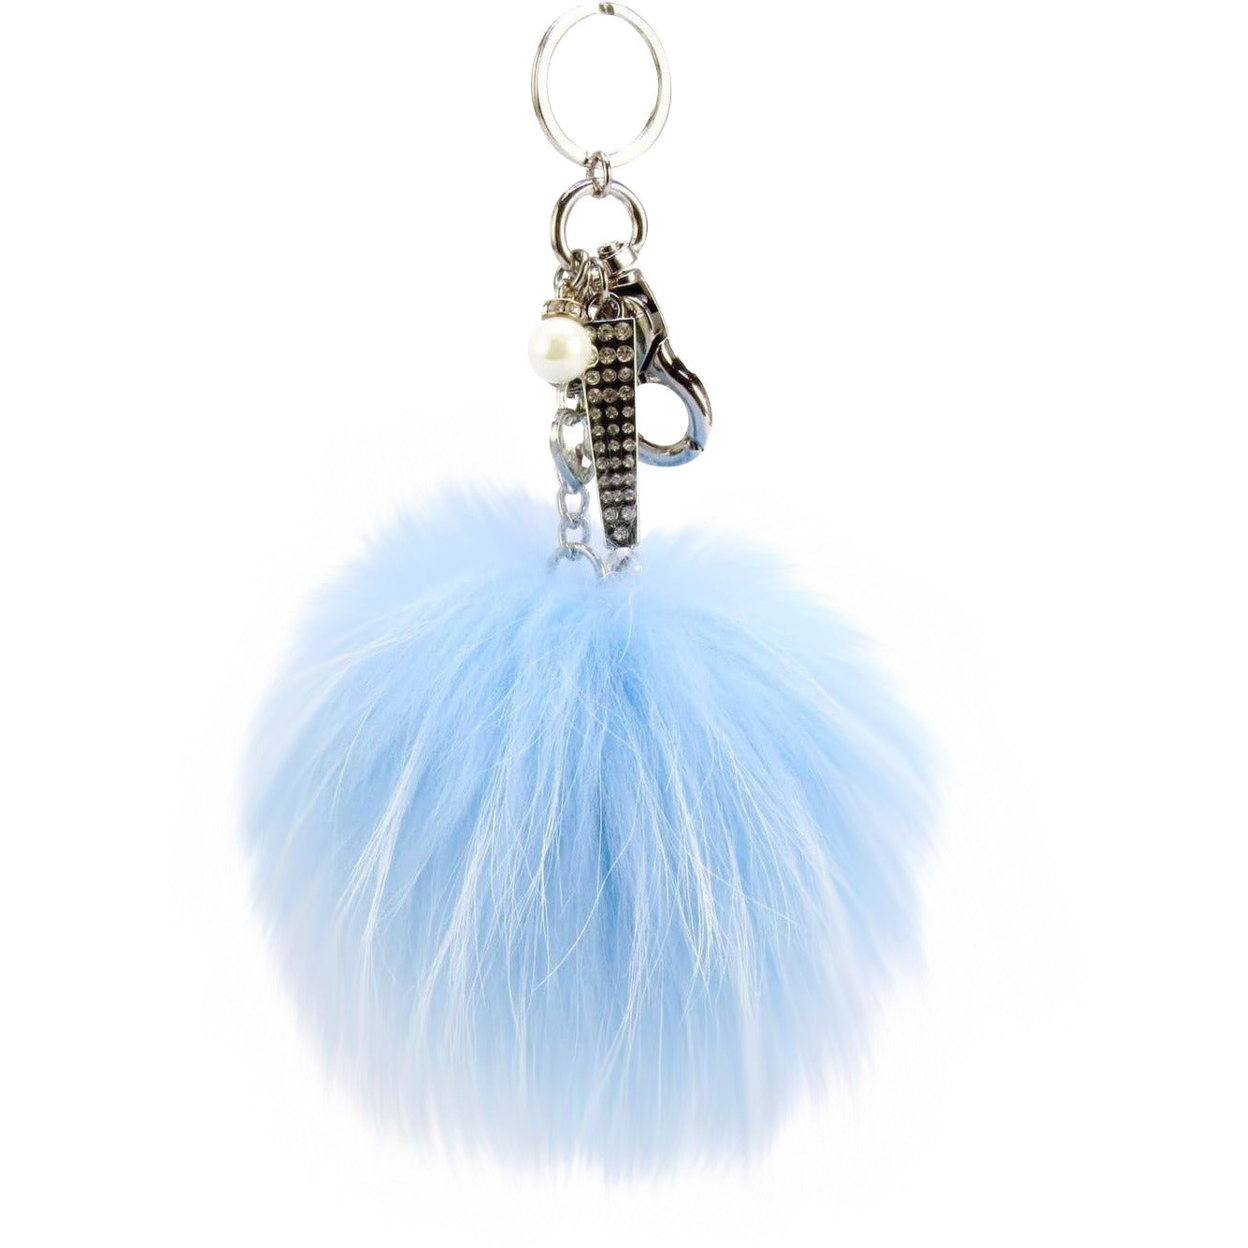 Real Fur Puff Ball Pom-Pom 6 Accessory Dangle Purse Charm - Light Blue With Silver Hardware